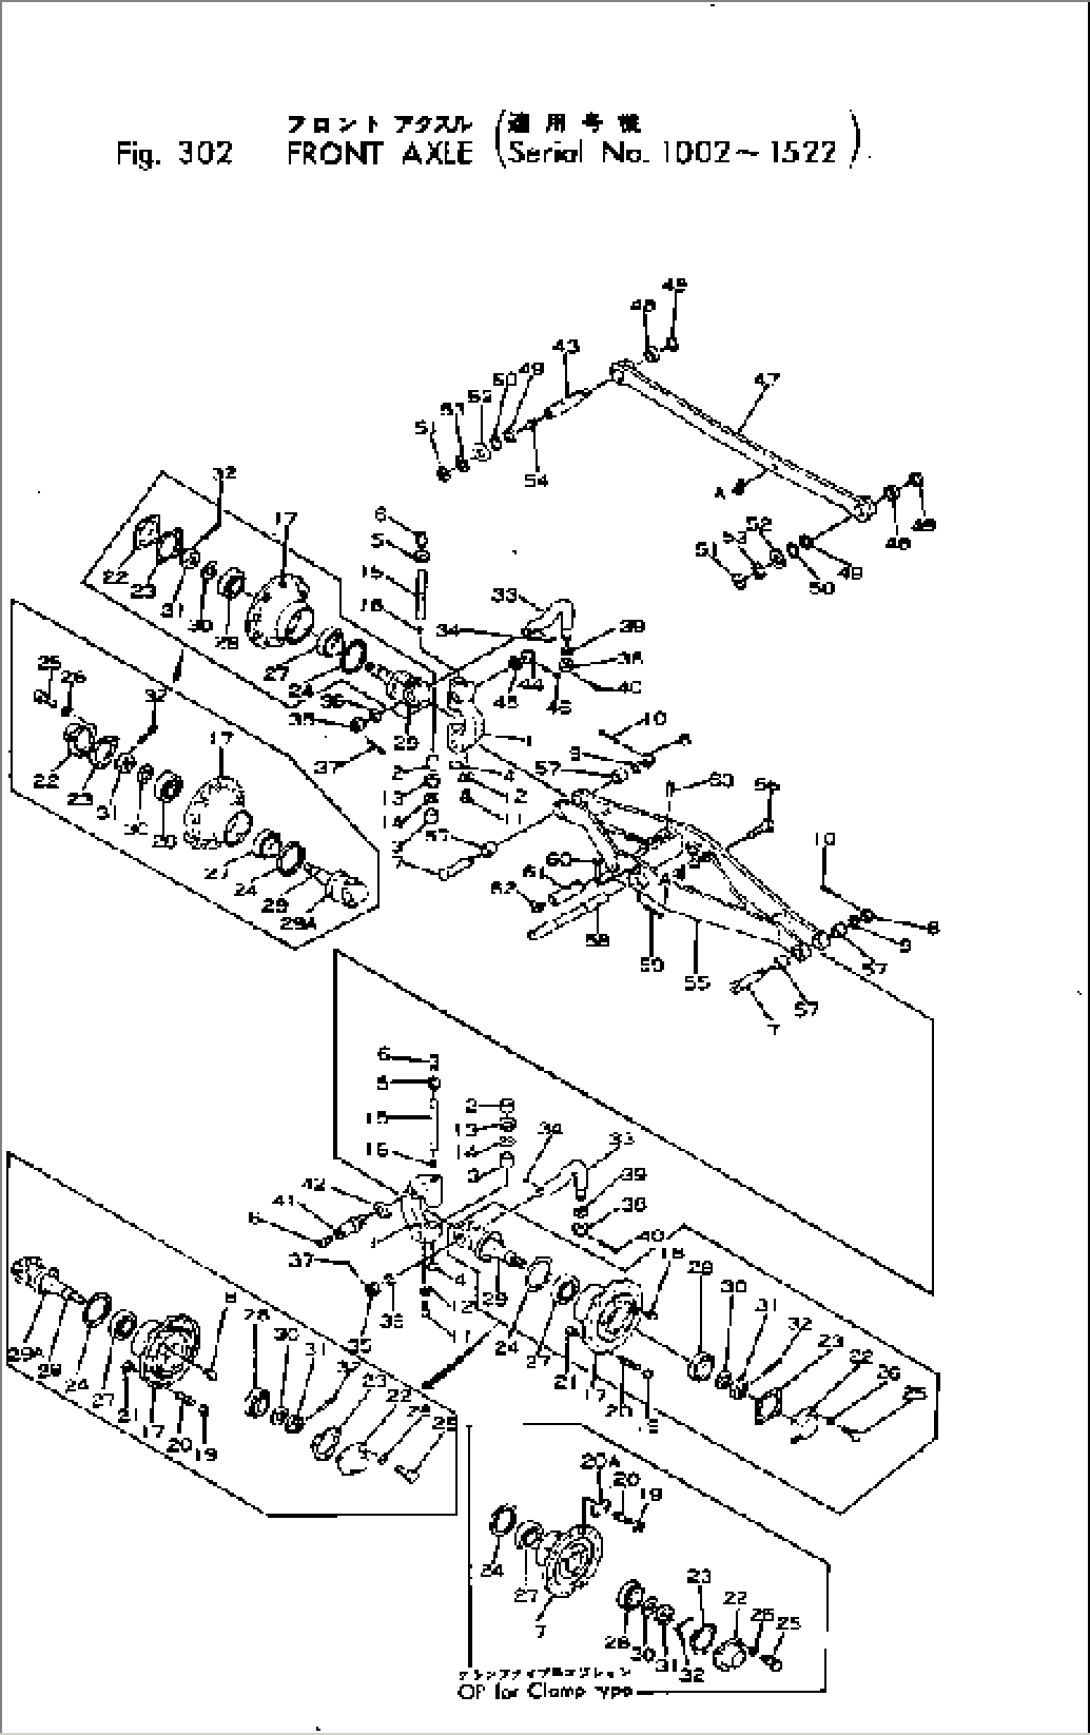 FRONT AXLE(#1002-1522)